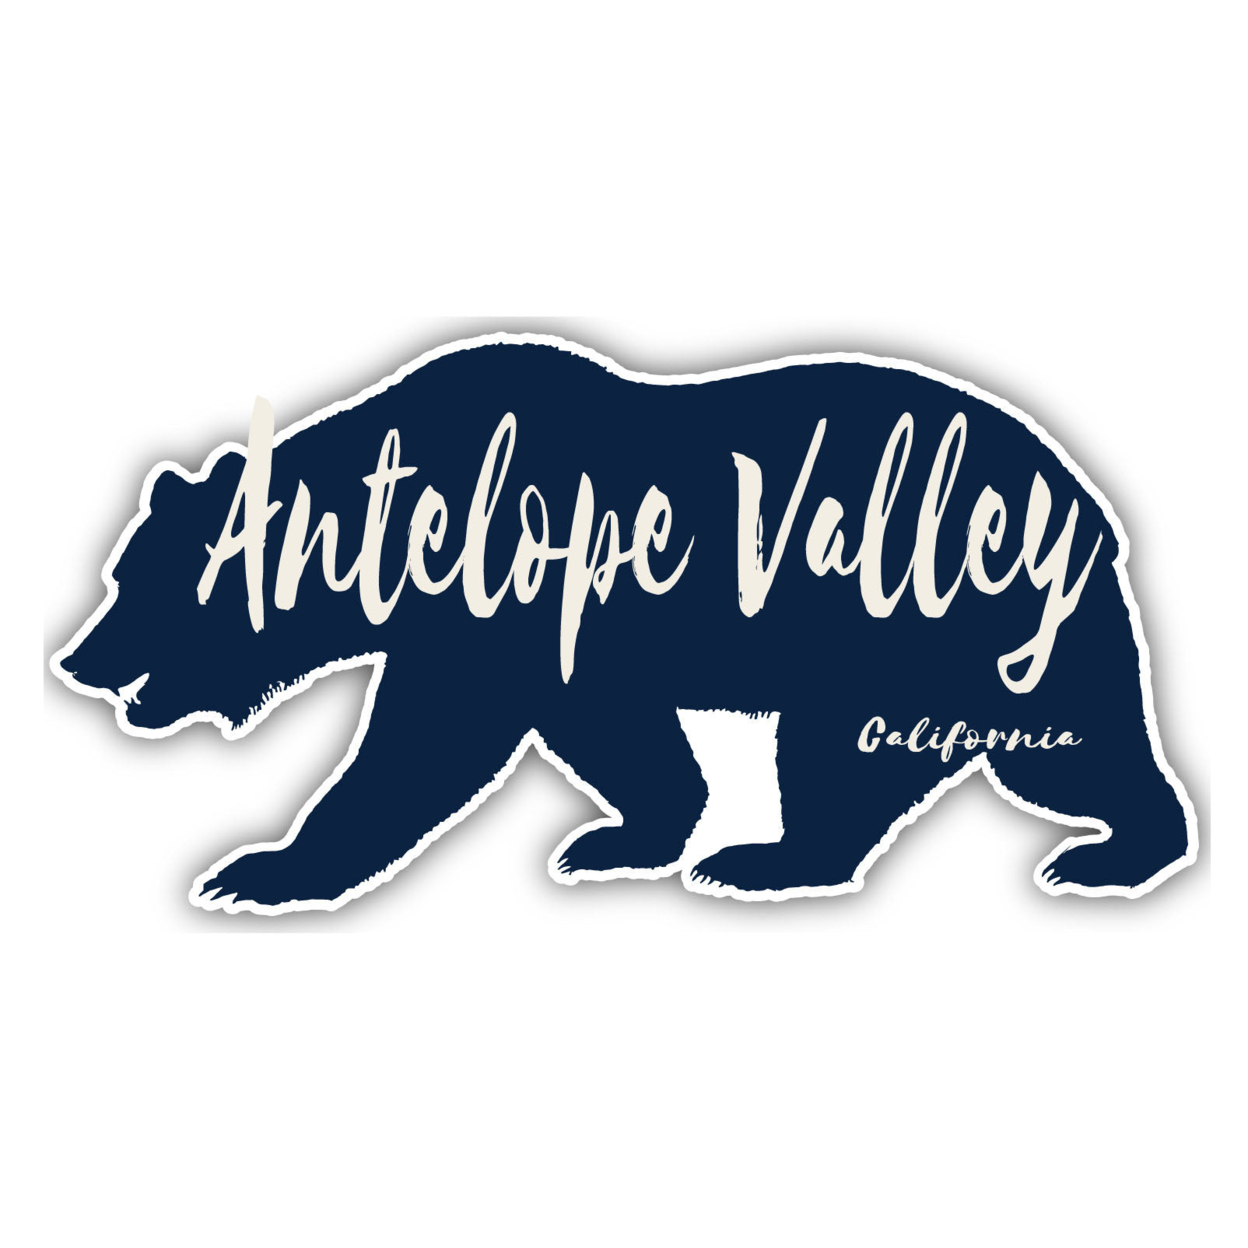 Antelope Valley California Souvenir Decorative Stickers (Choose Theme And Size) - 4-Pack, 6-Inch, Camp Life